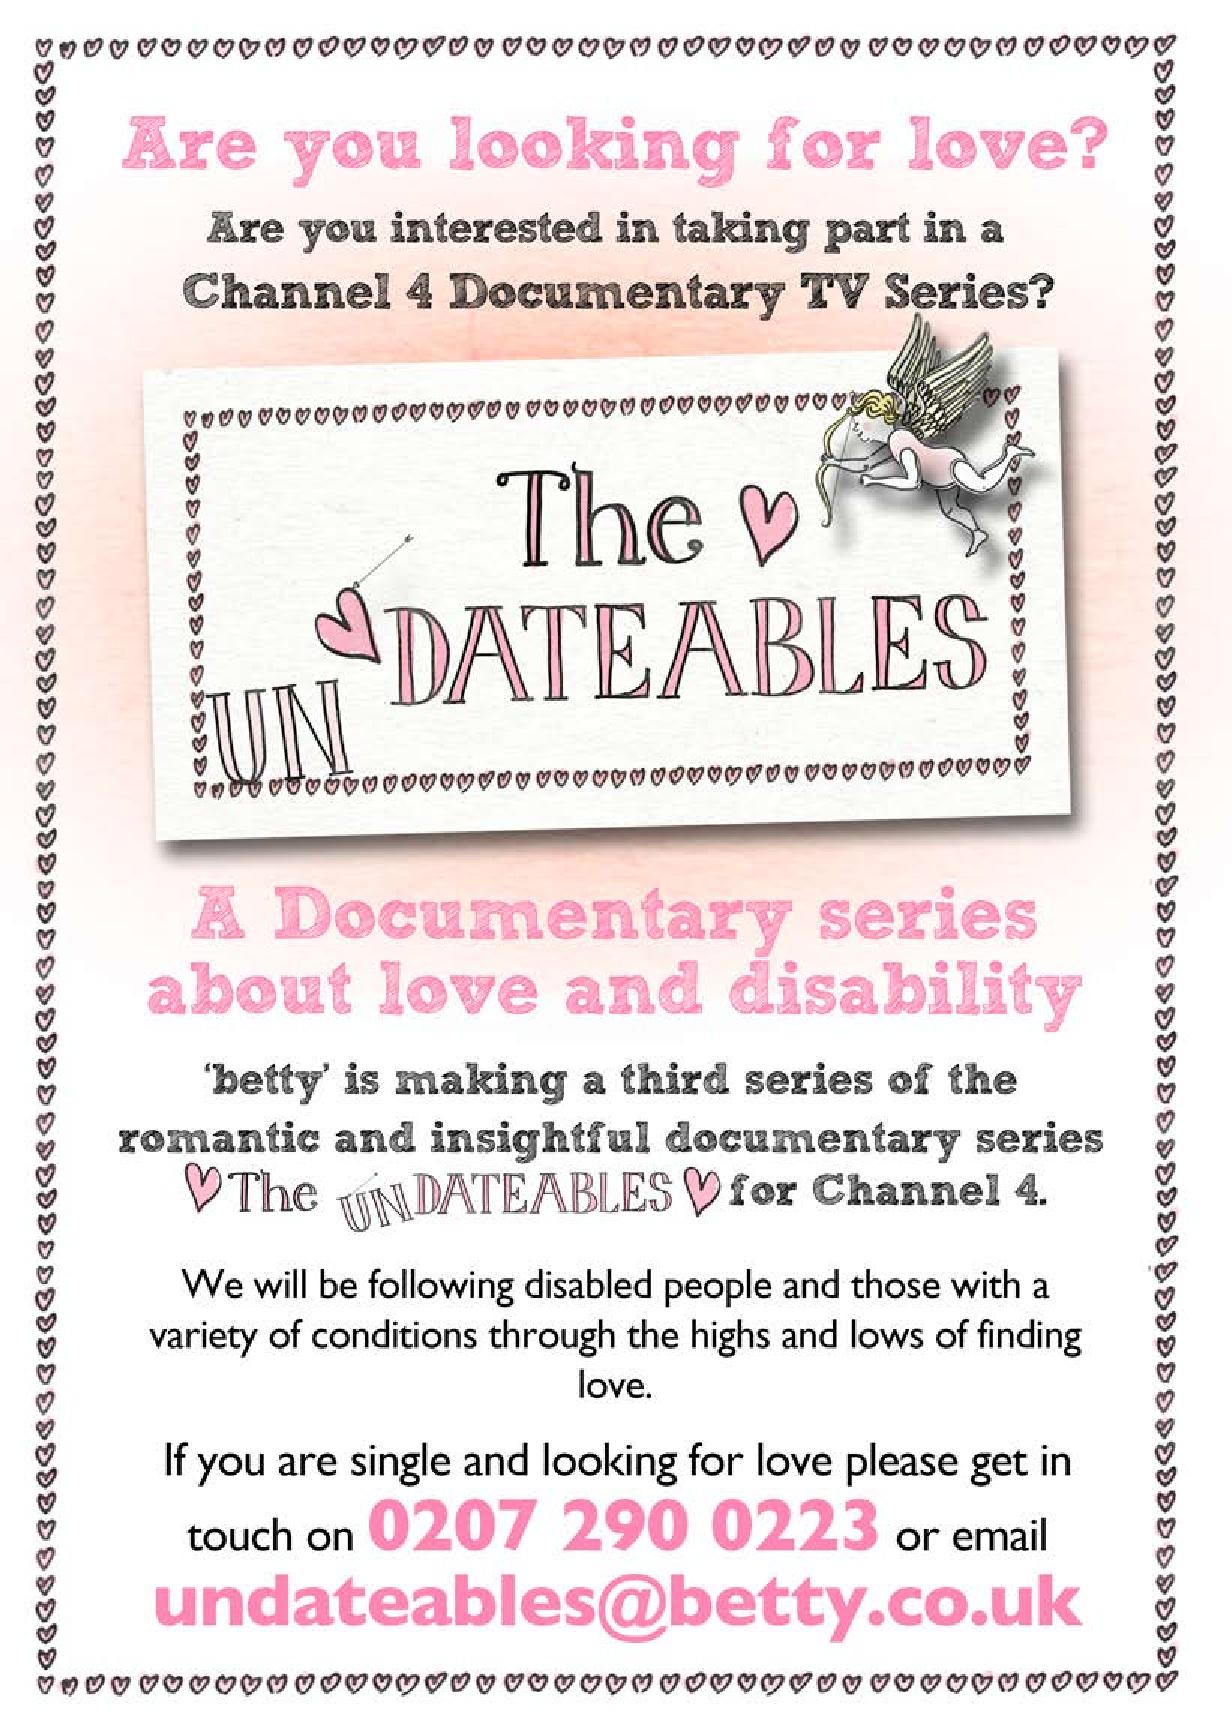 Click to view The Undateables profile and get involved now!